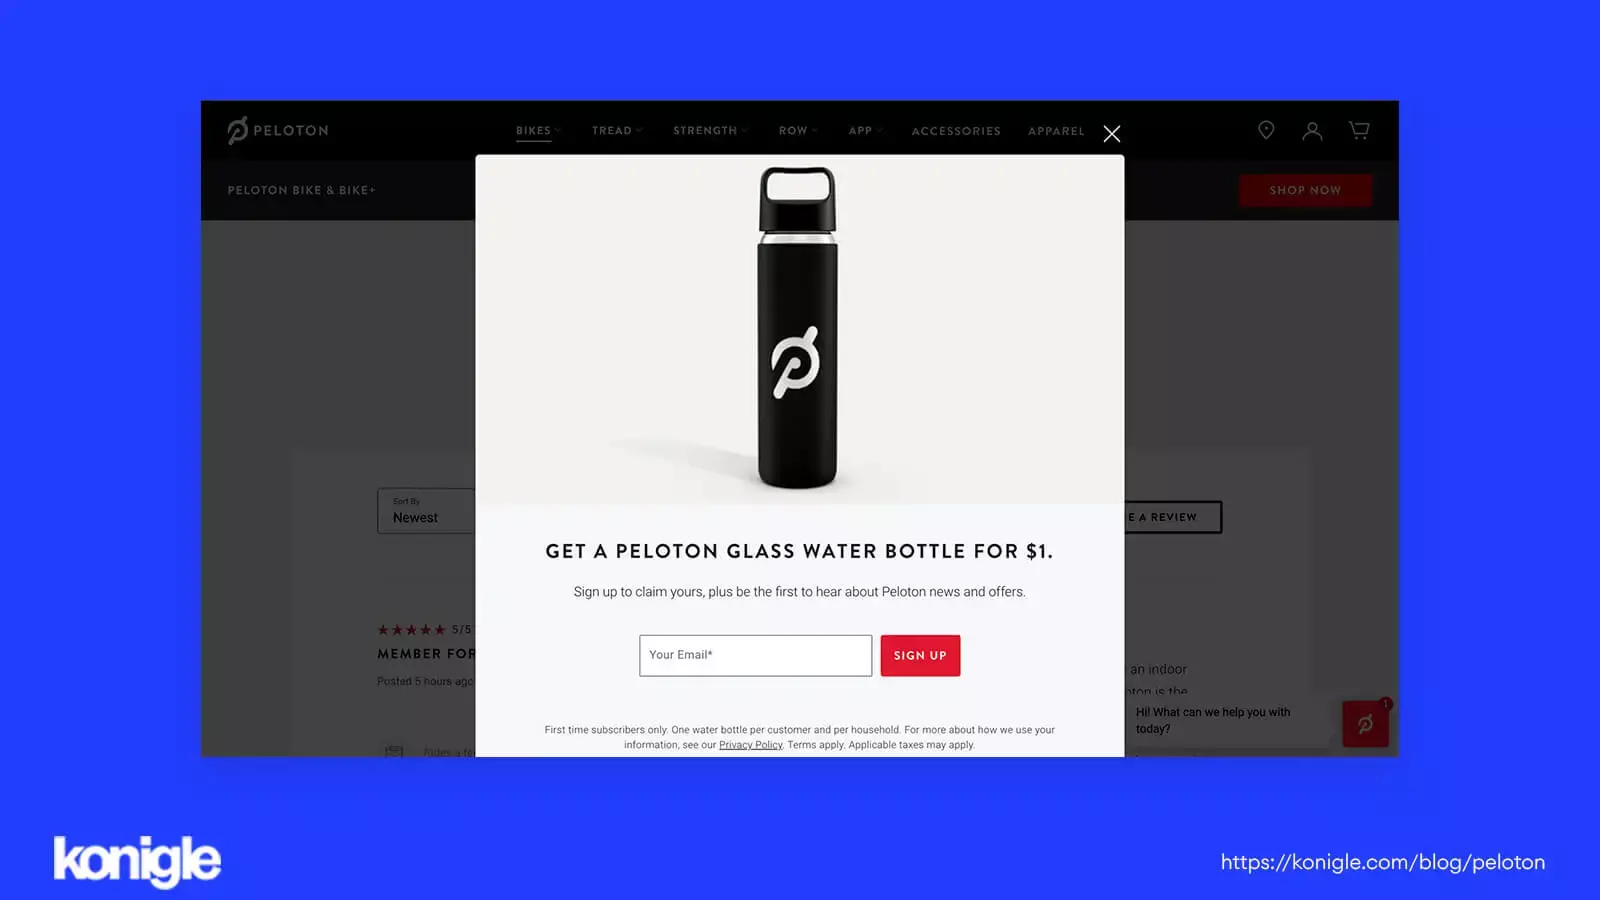 A pop-up appears upon entry prompting visitors to subscribe to Peloton's newsletter in exchange for a reward